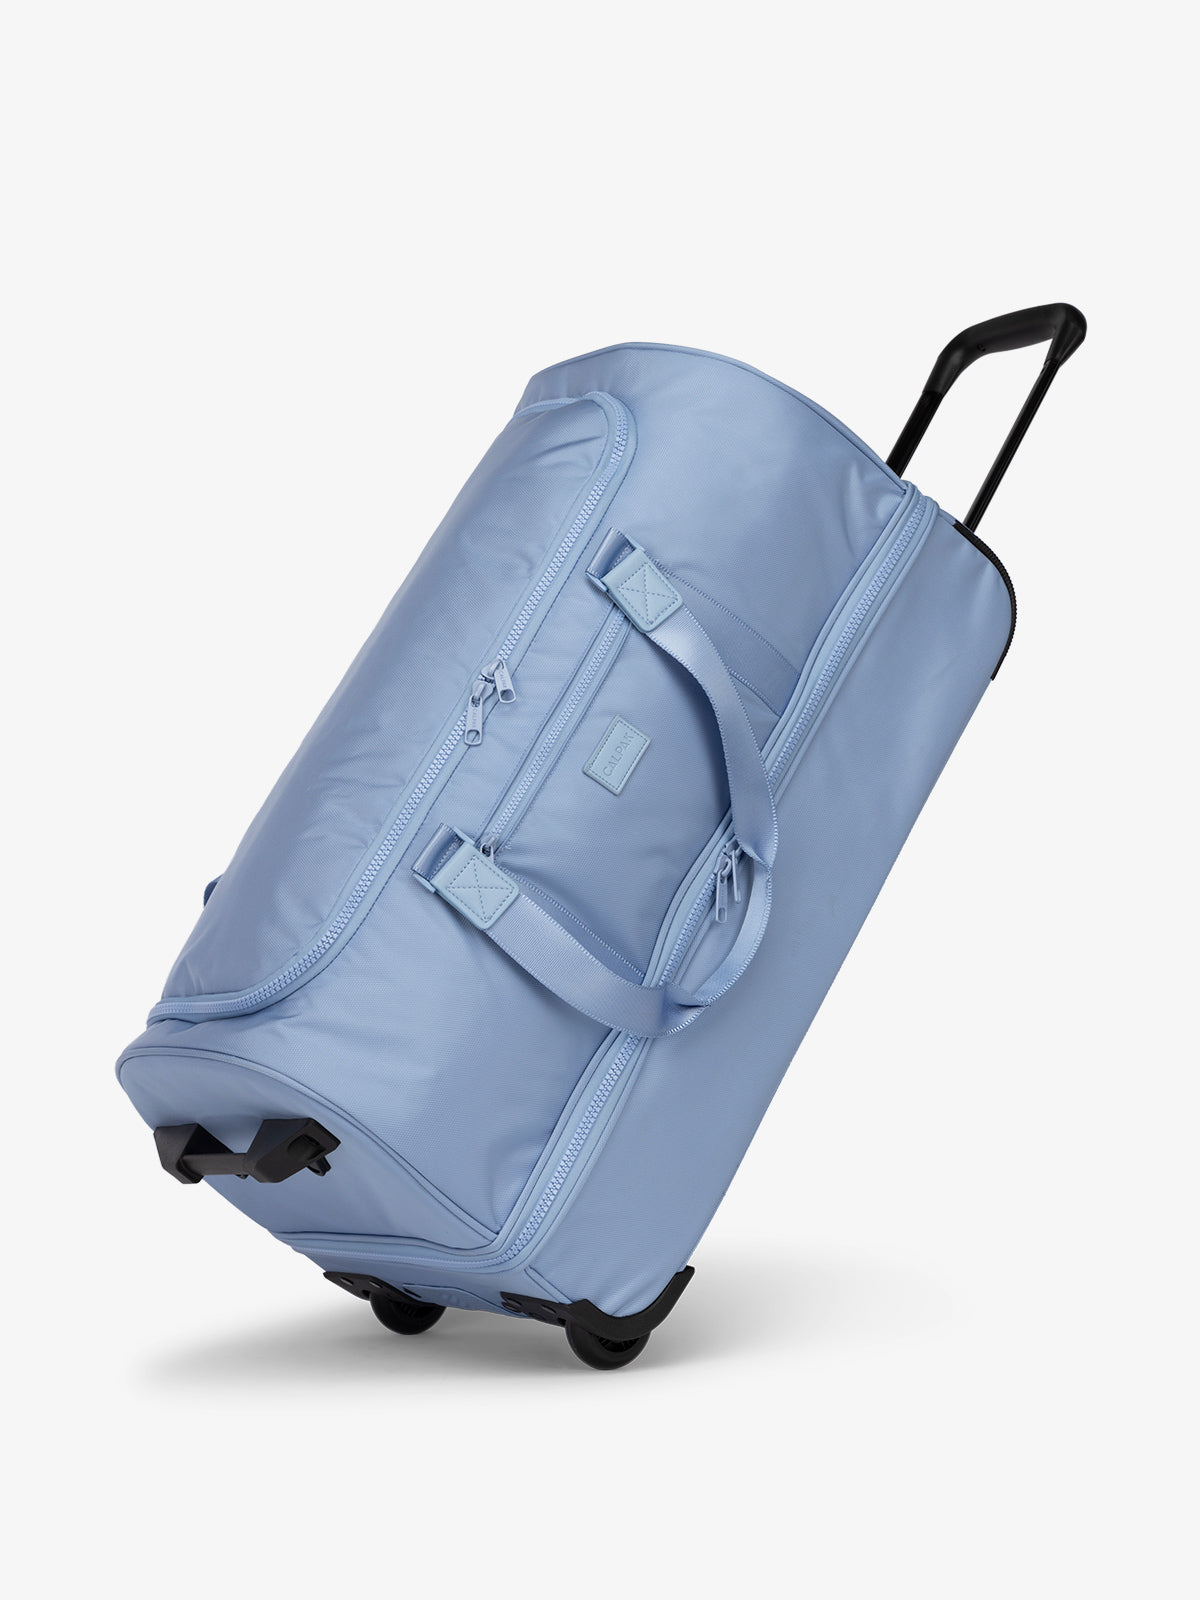 Side view of sky blue large rolling travel duffel bag with wheels